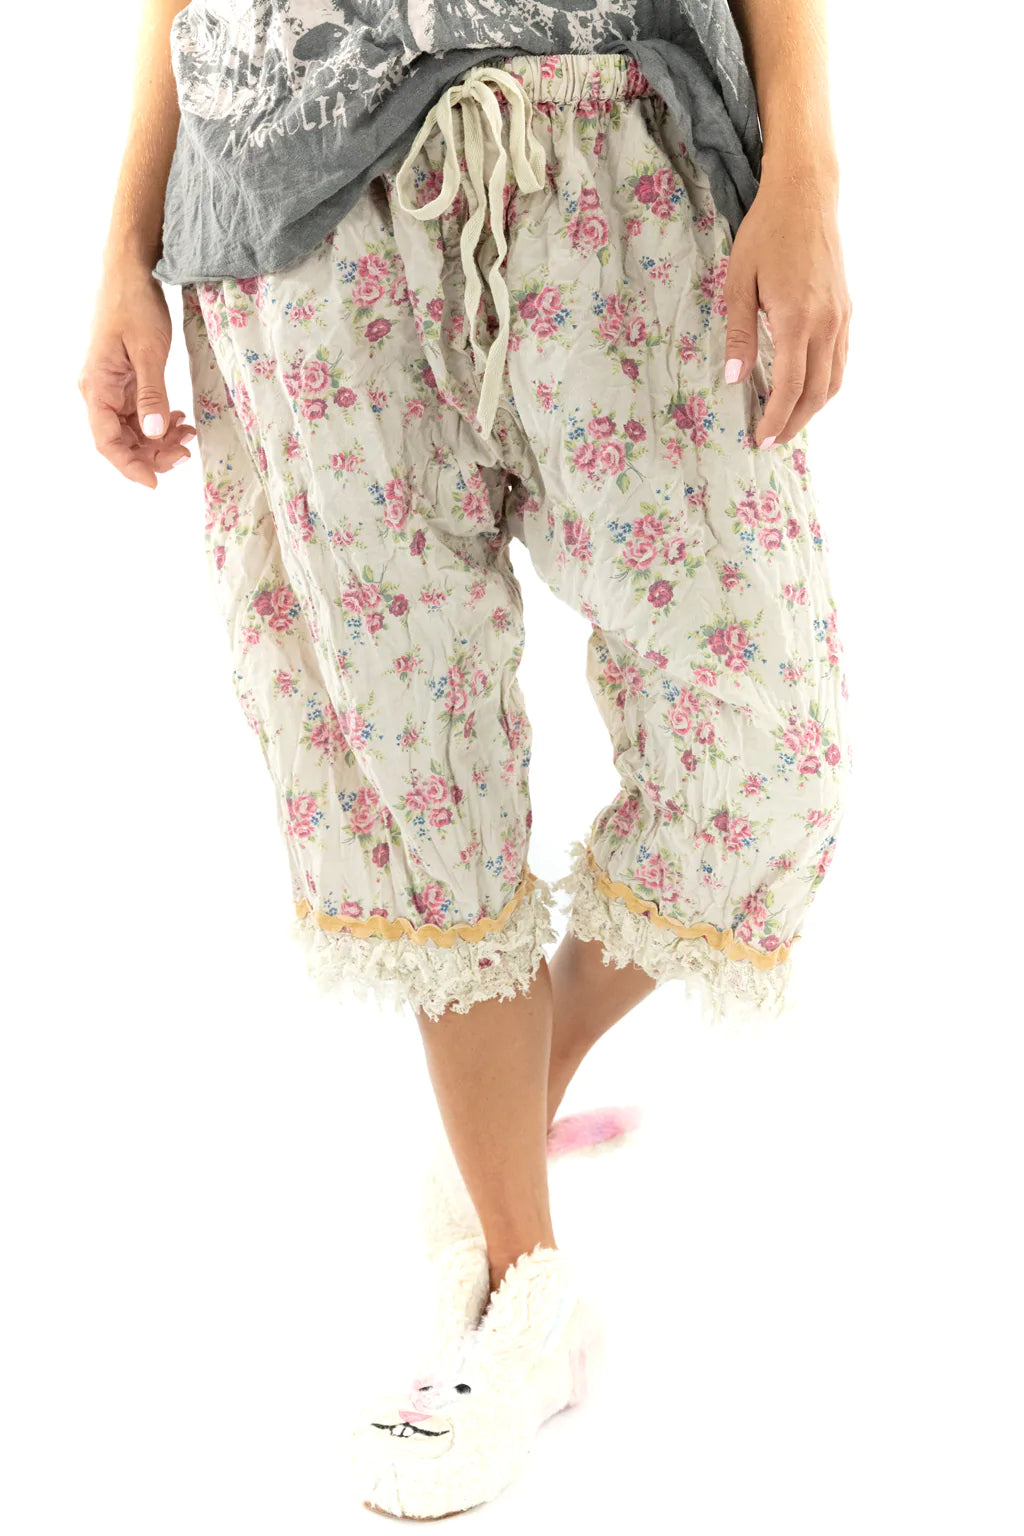 BLOOMERS 183- FLORAL PRINT GRADY BLOOMERS